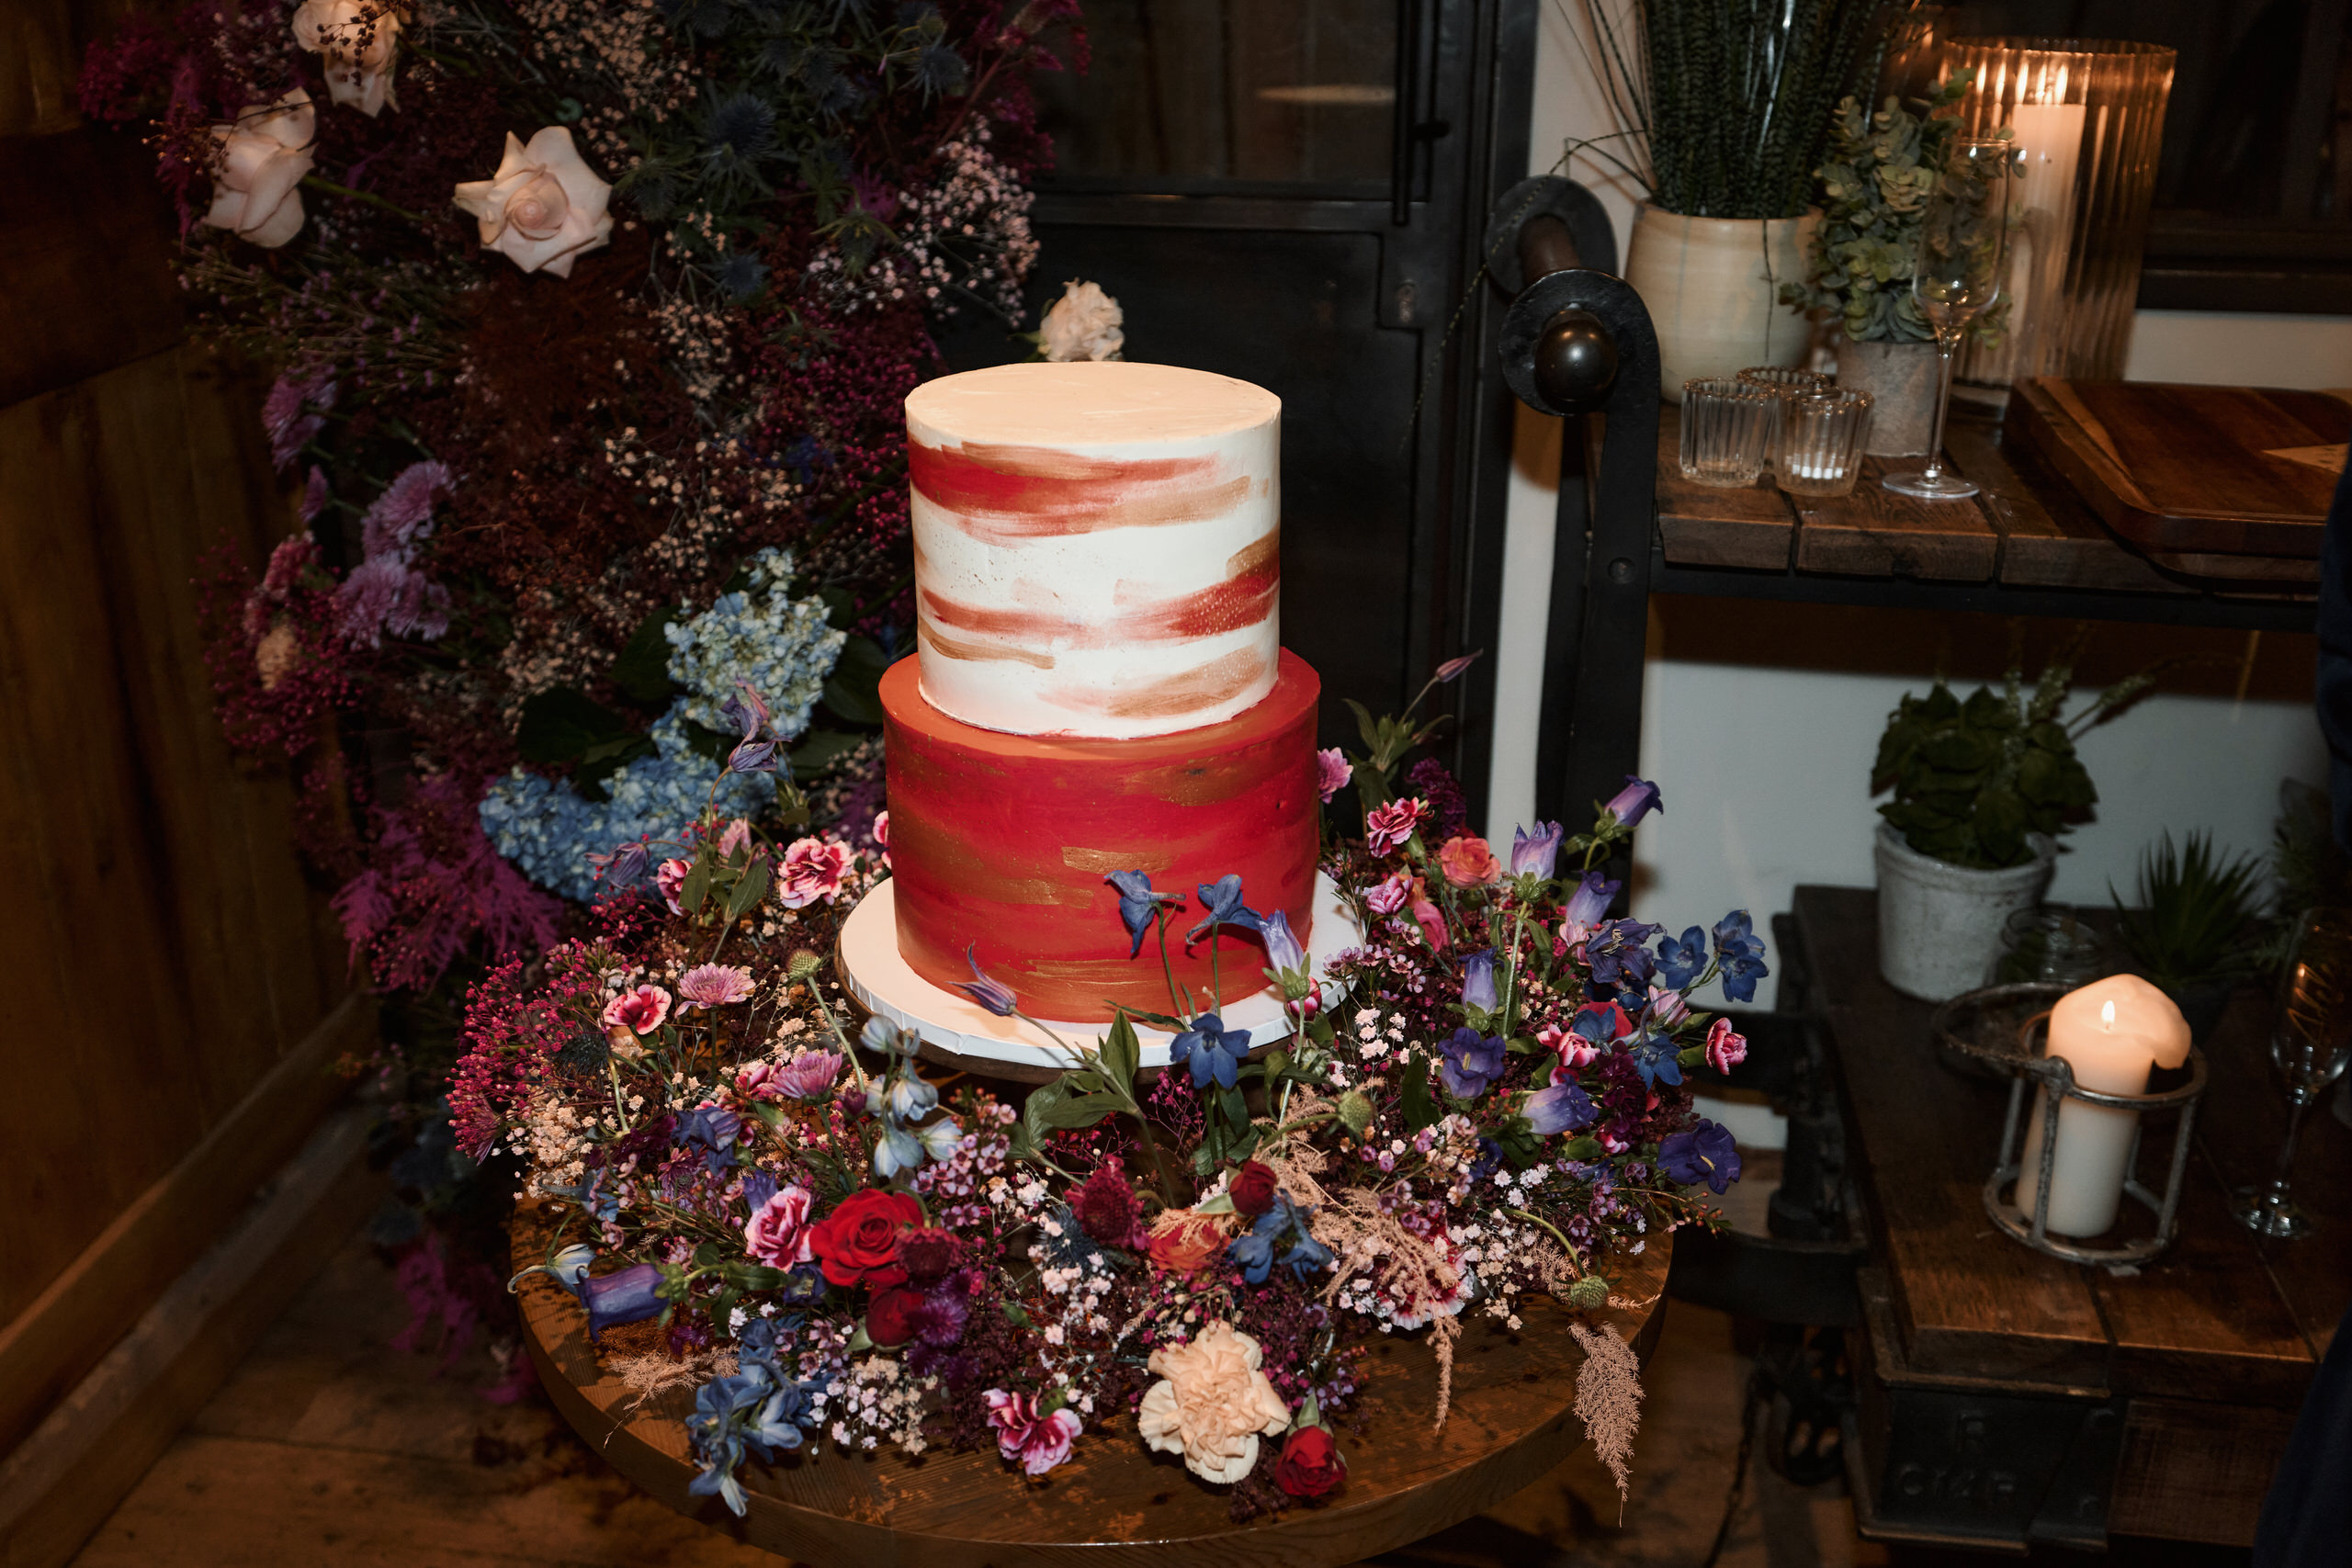 A wedding cake sitting on a wood table.